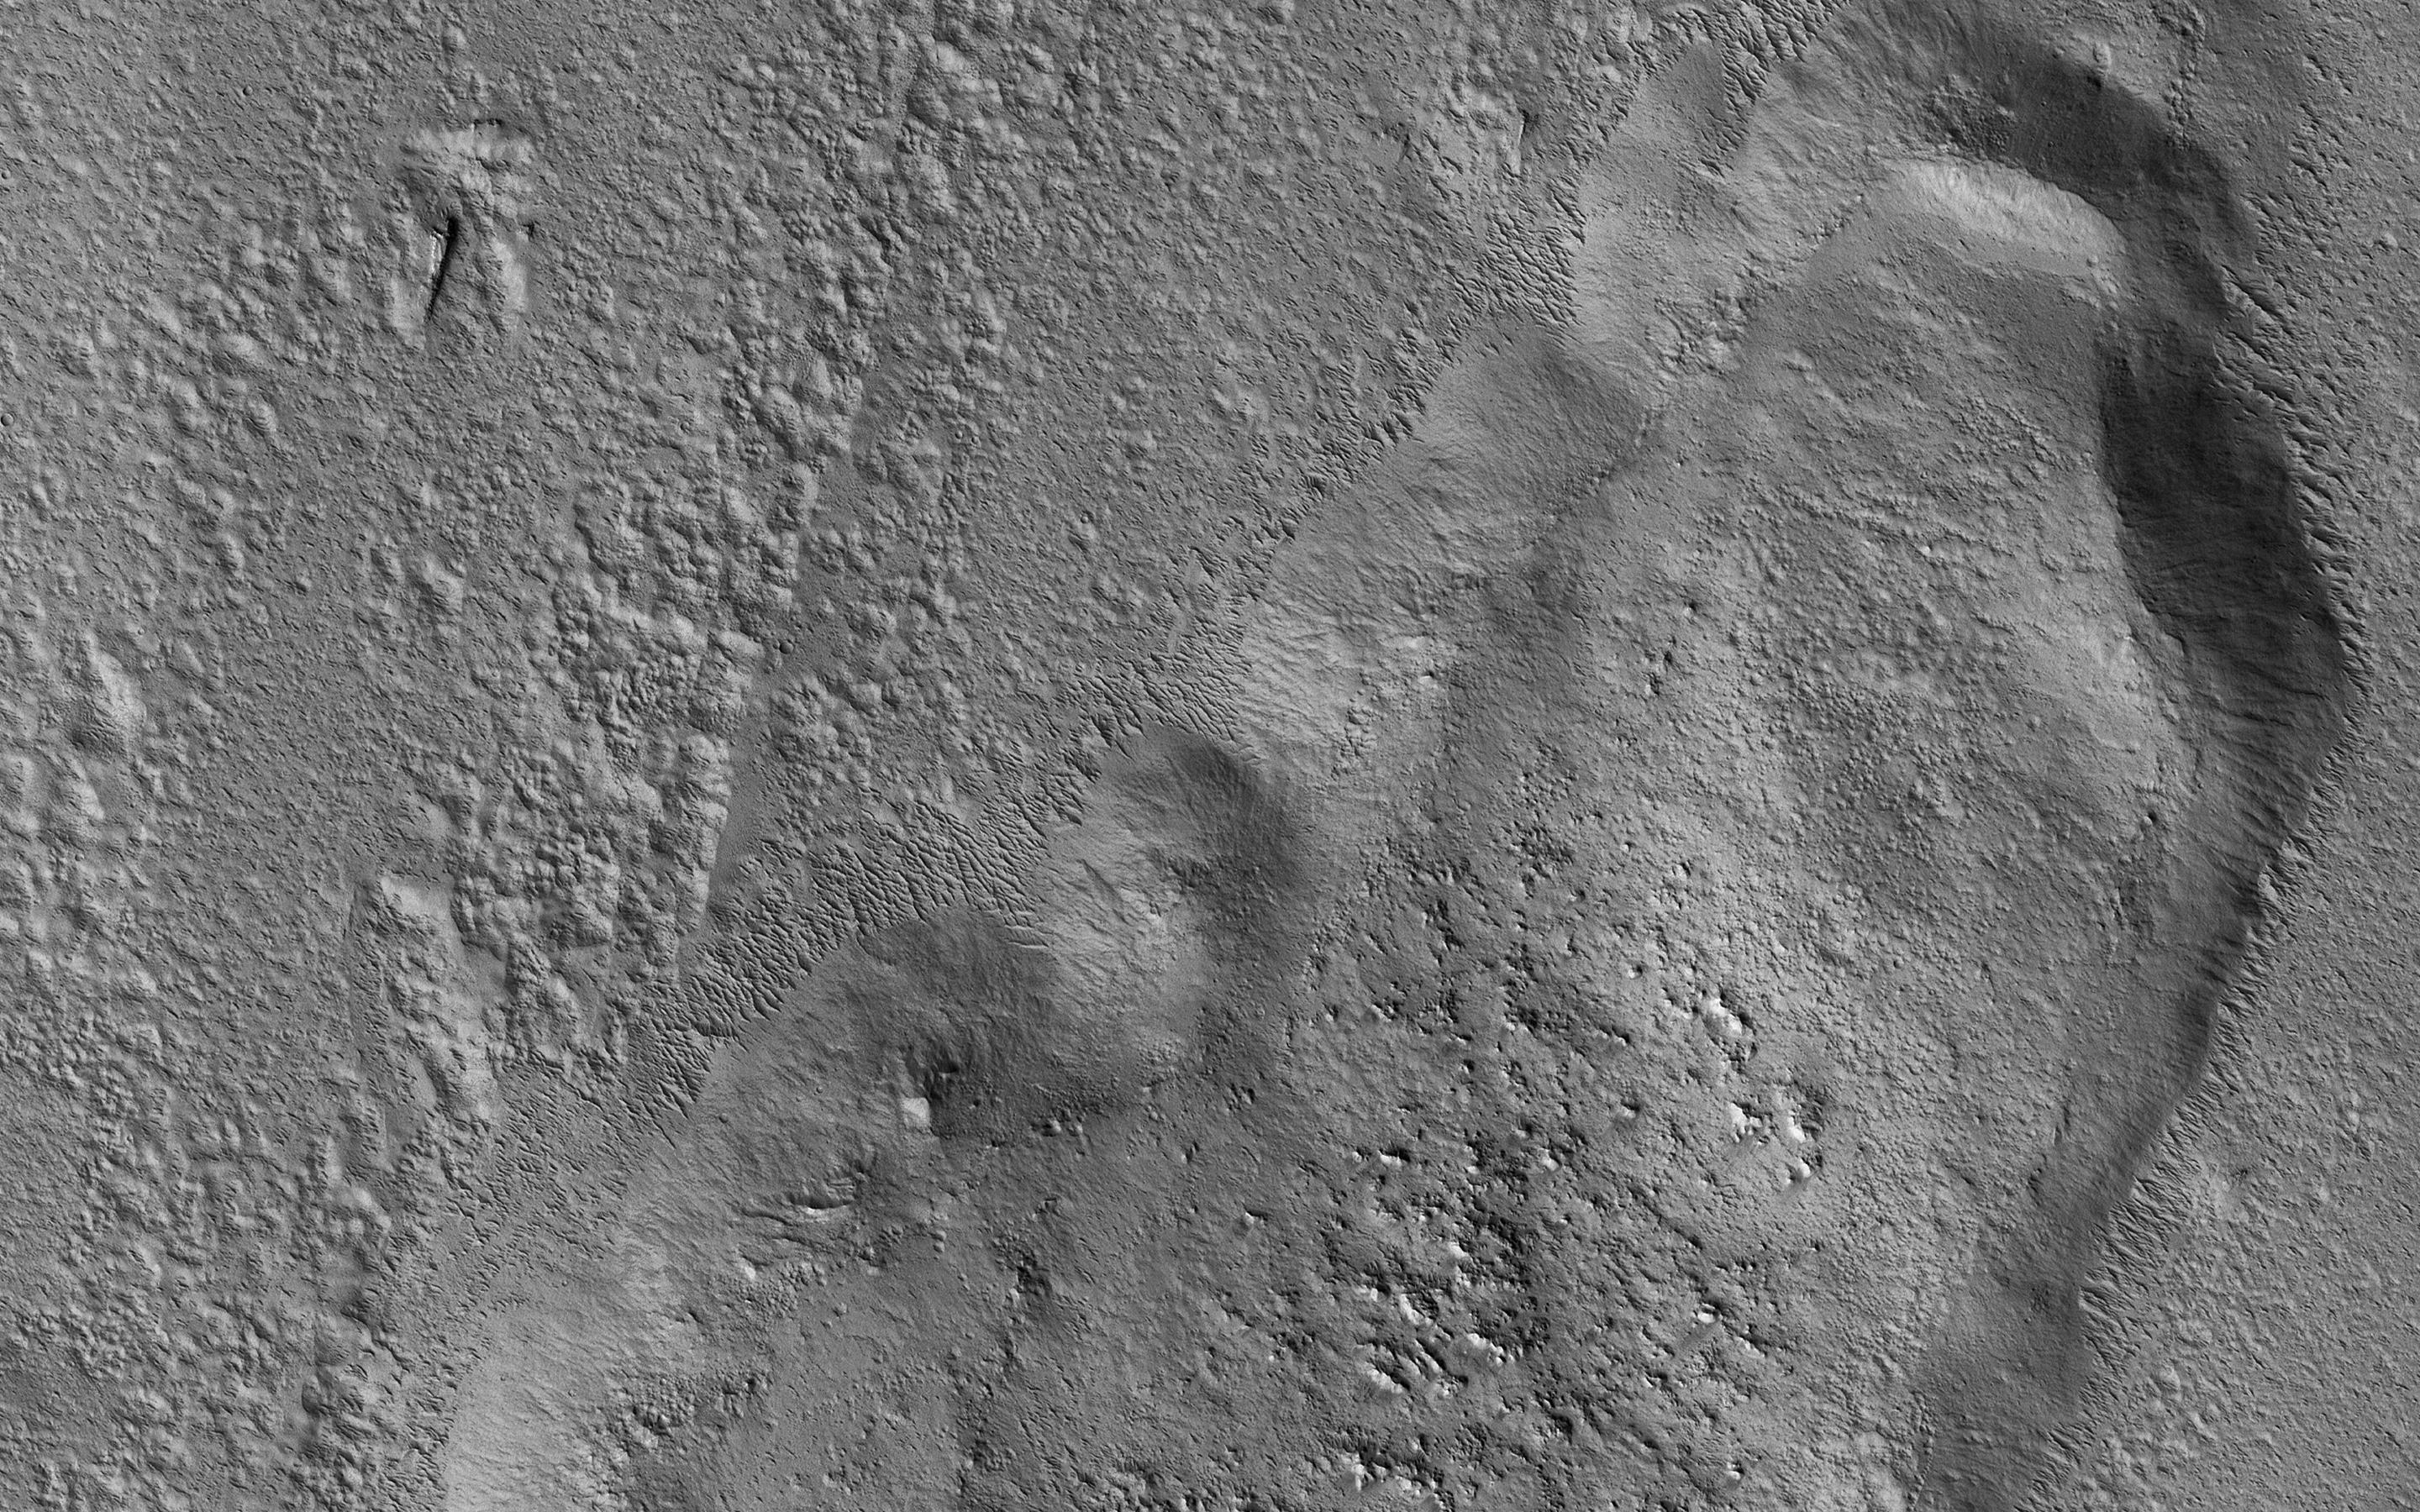 This image acquired on September 24, 2018 by NASAs Mars Reconnaissance Orbiter, shows a huge tongue-like form, which looks a like a mudflow with boulders on its surface.